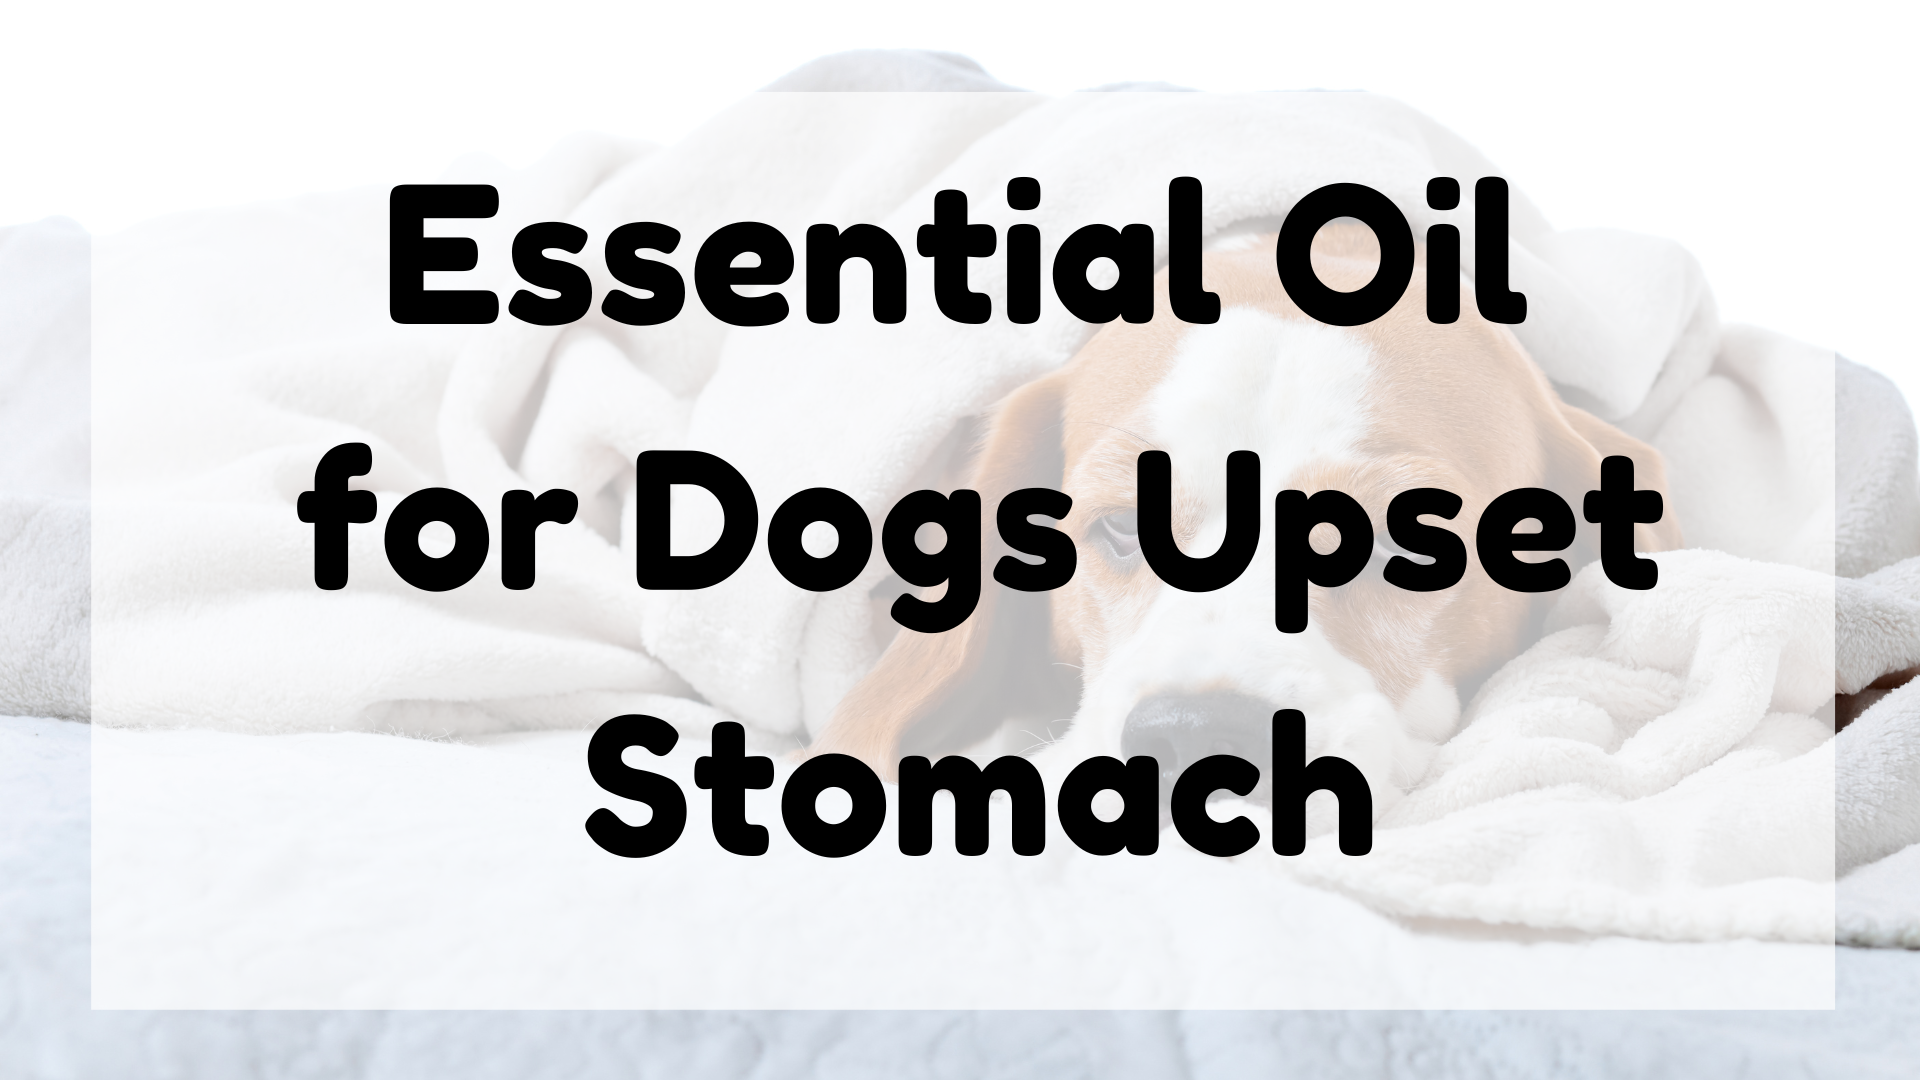 Essential Oil for Dog Upset stomach featured image